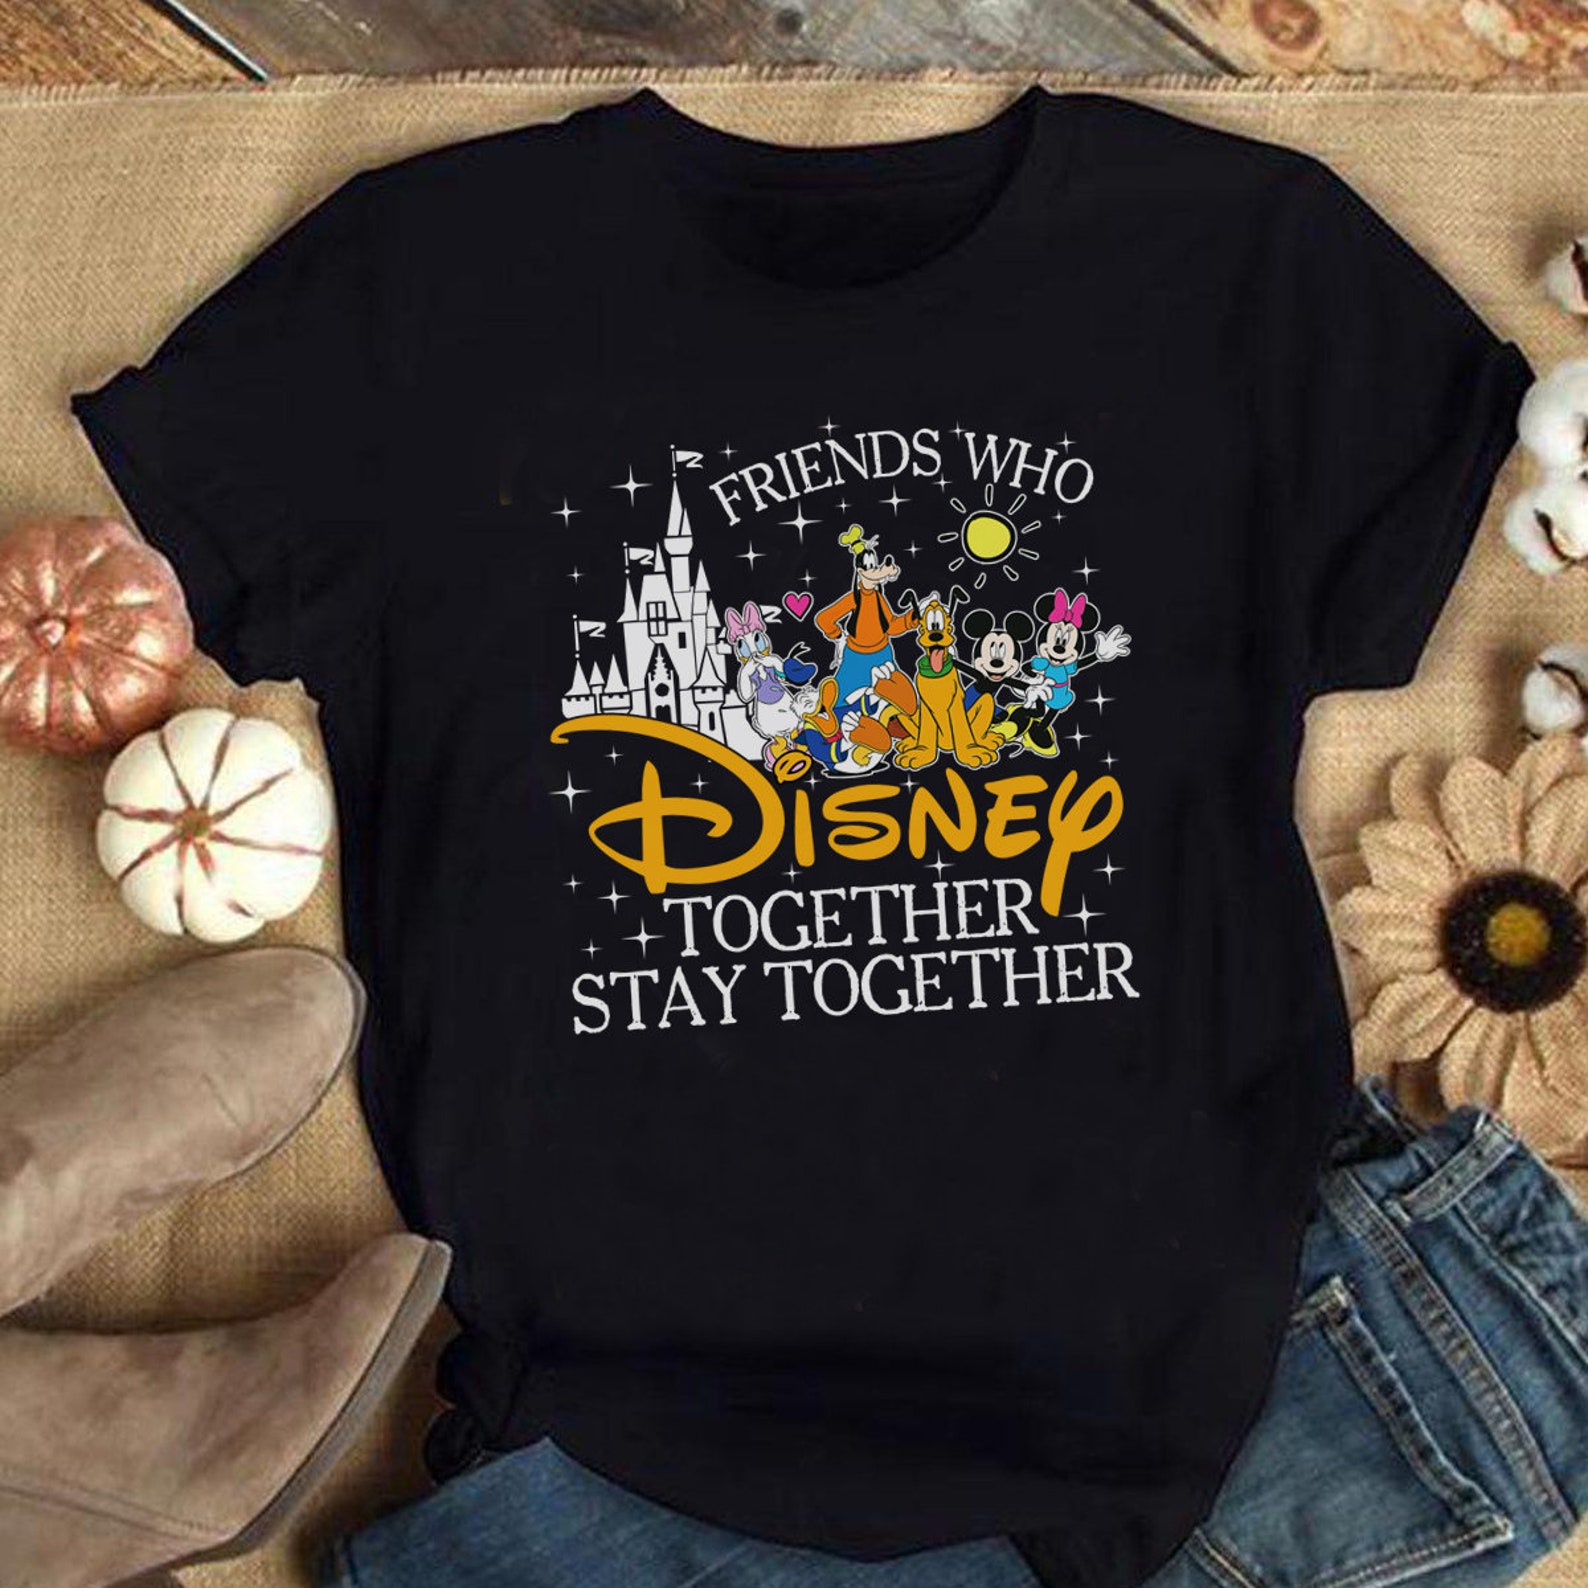 Friends Who Disney Together Stay Together Shirt Matching | Etsy